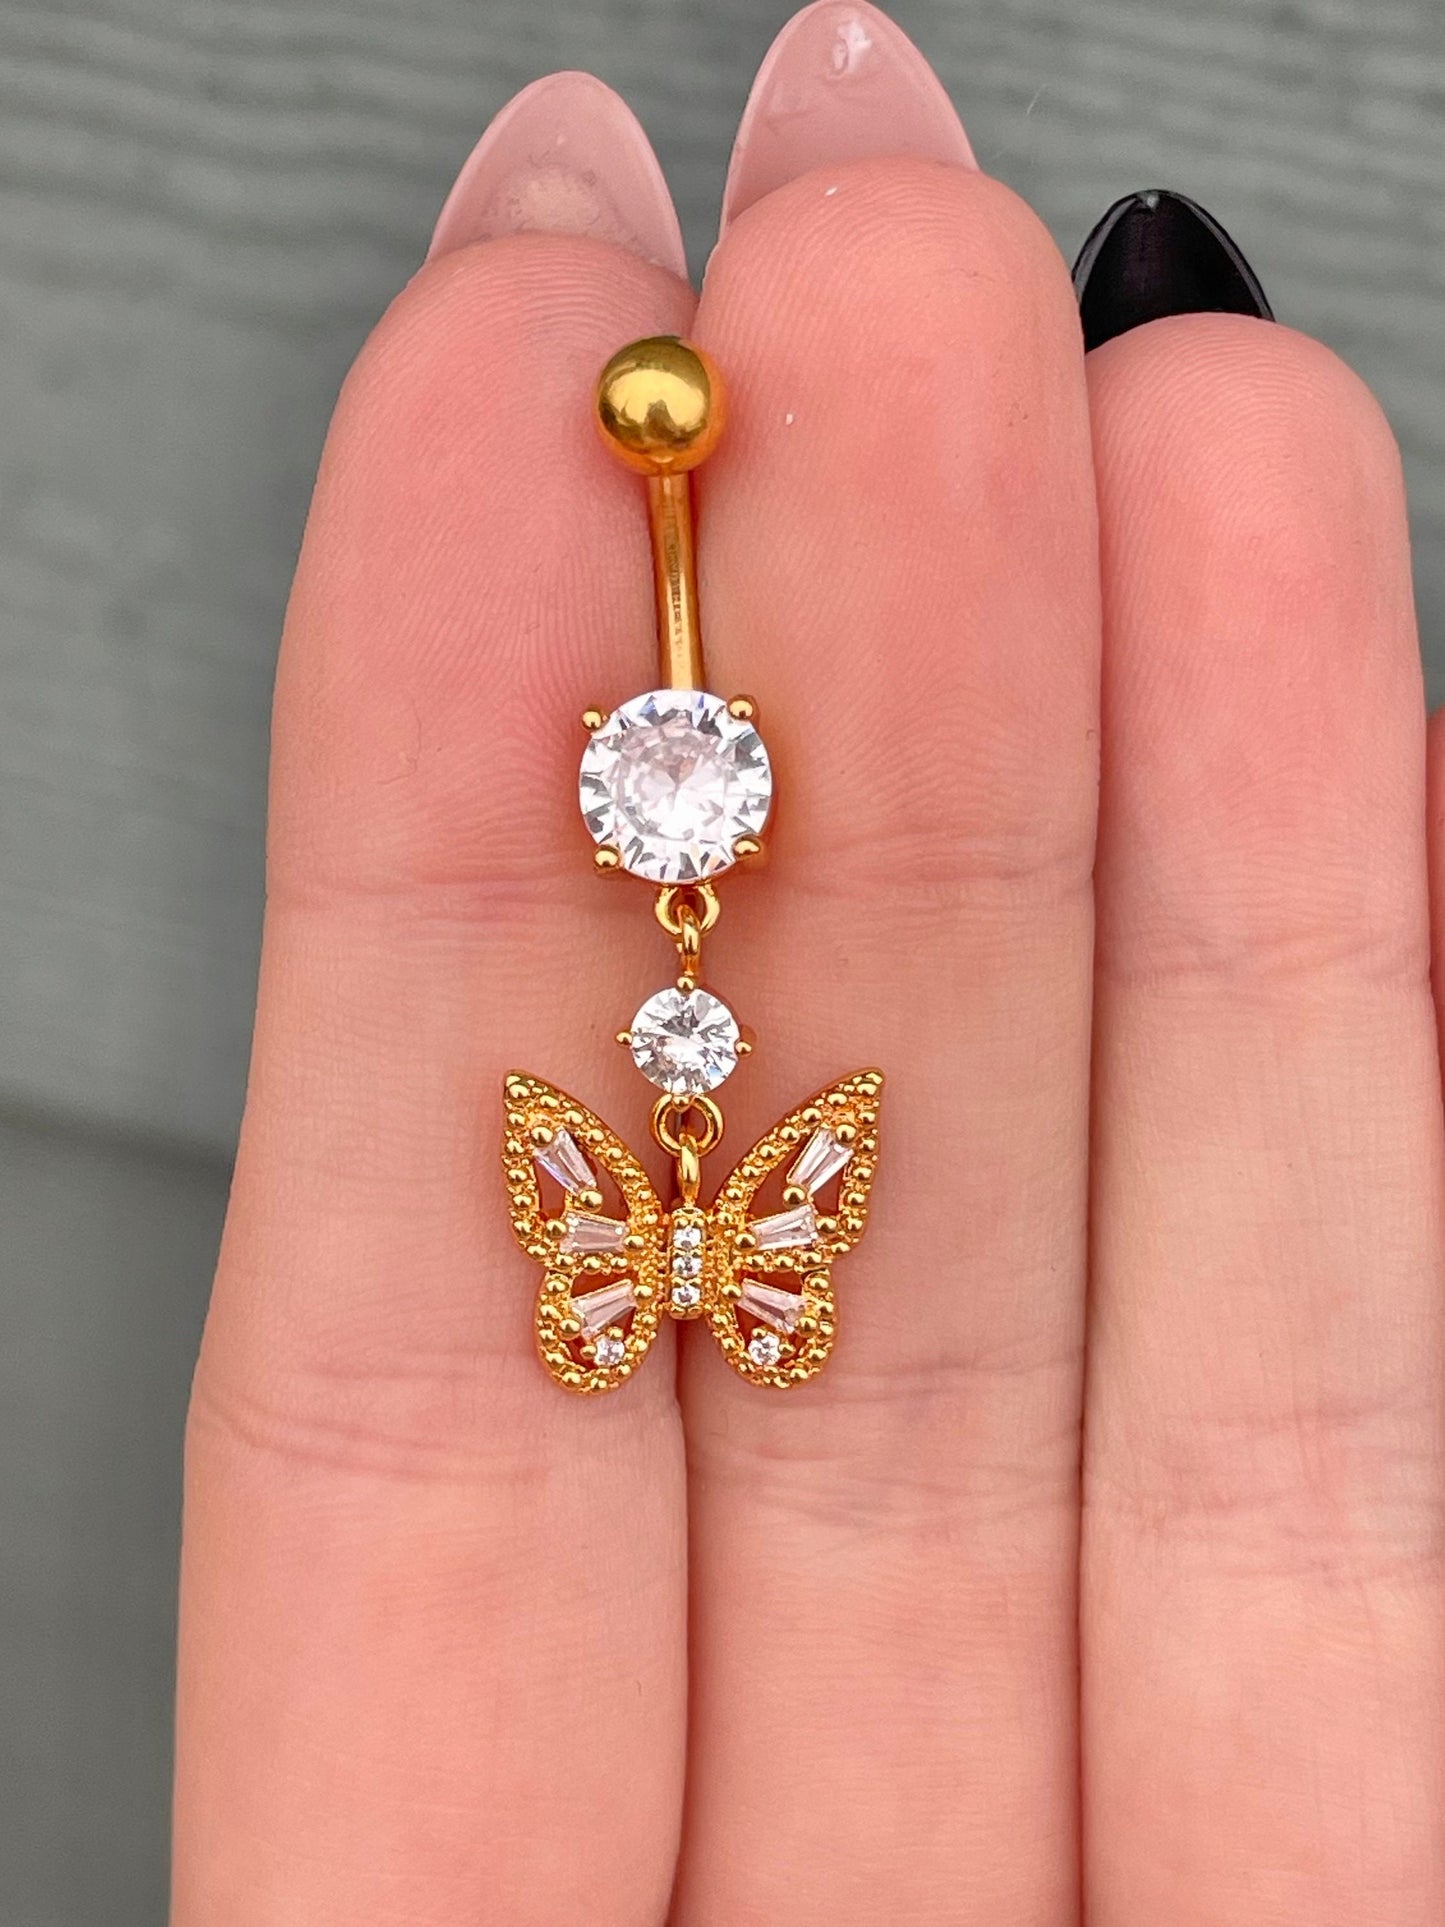 Dangling Butterfly Belly Button Ring (14G | 10mm | Surgical Steel | Silver or Gold)